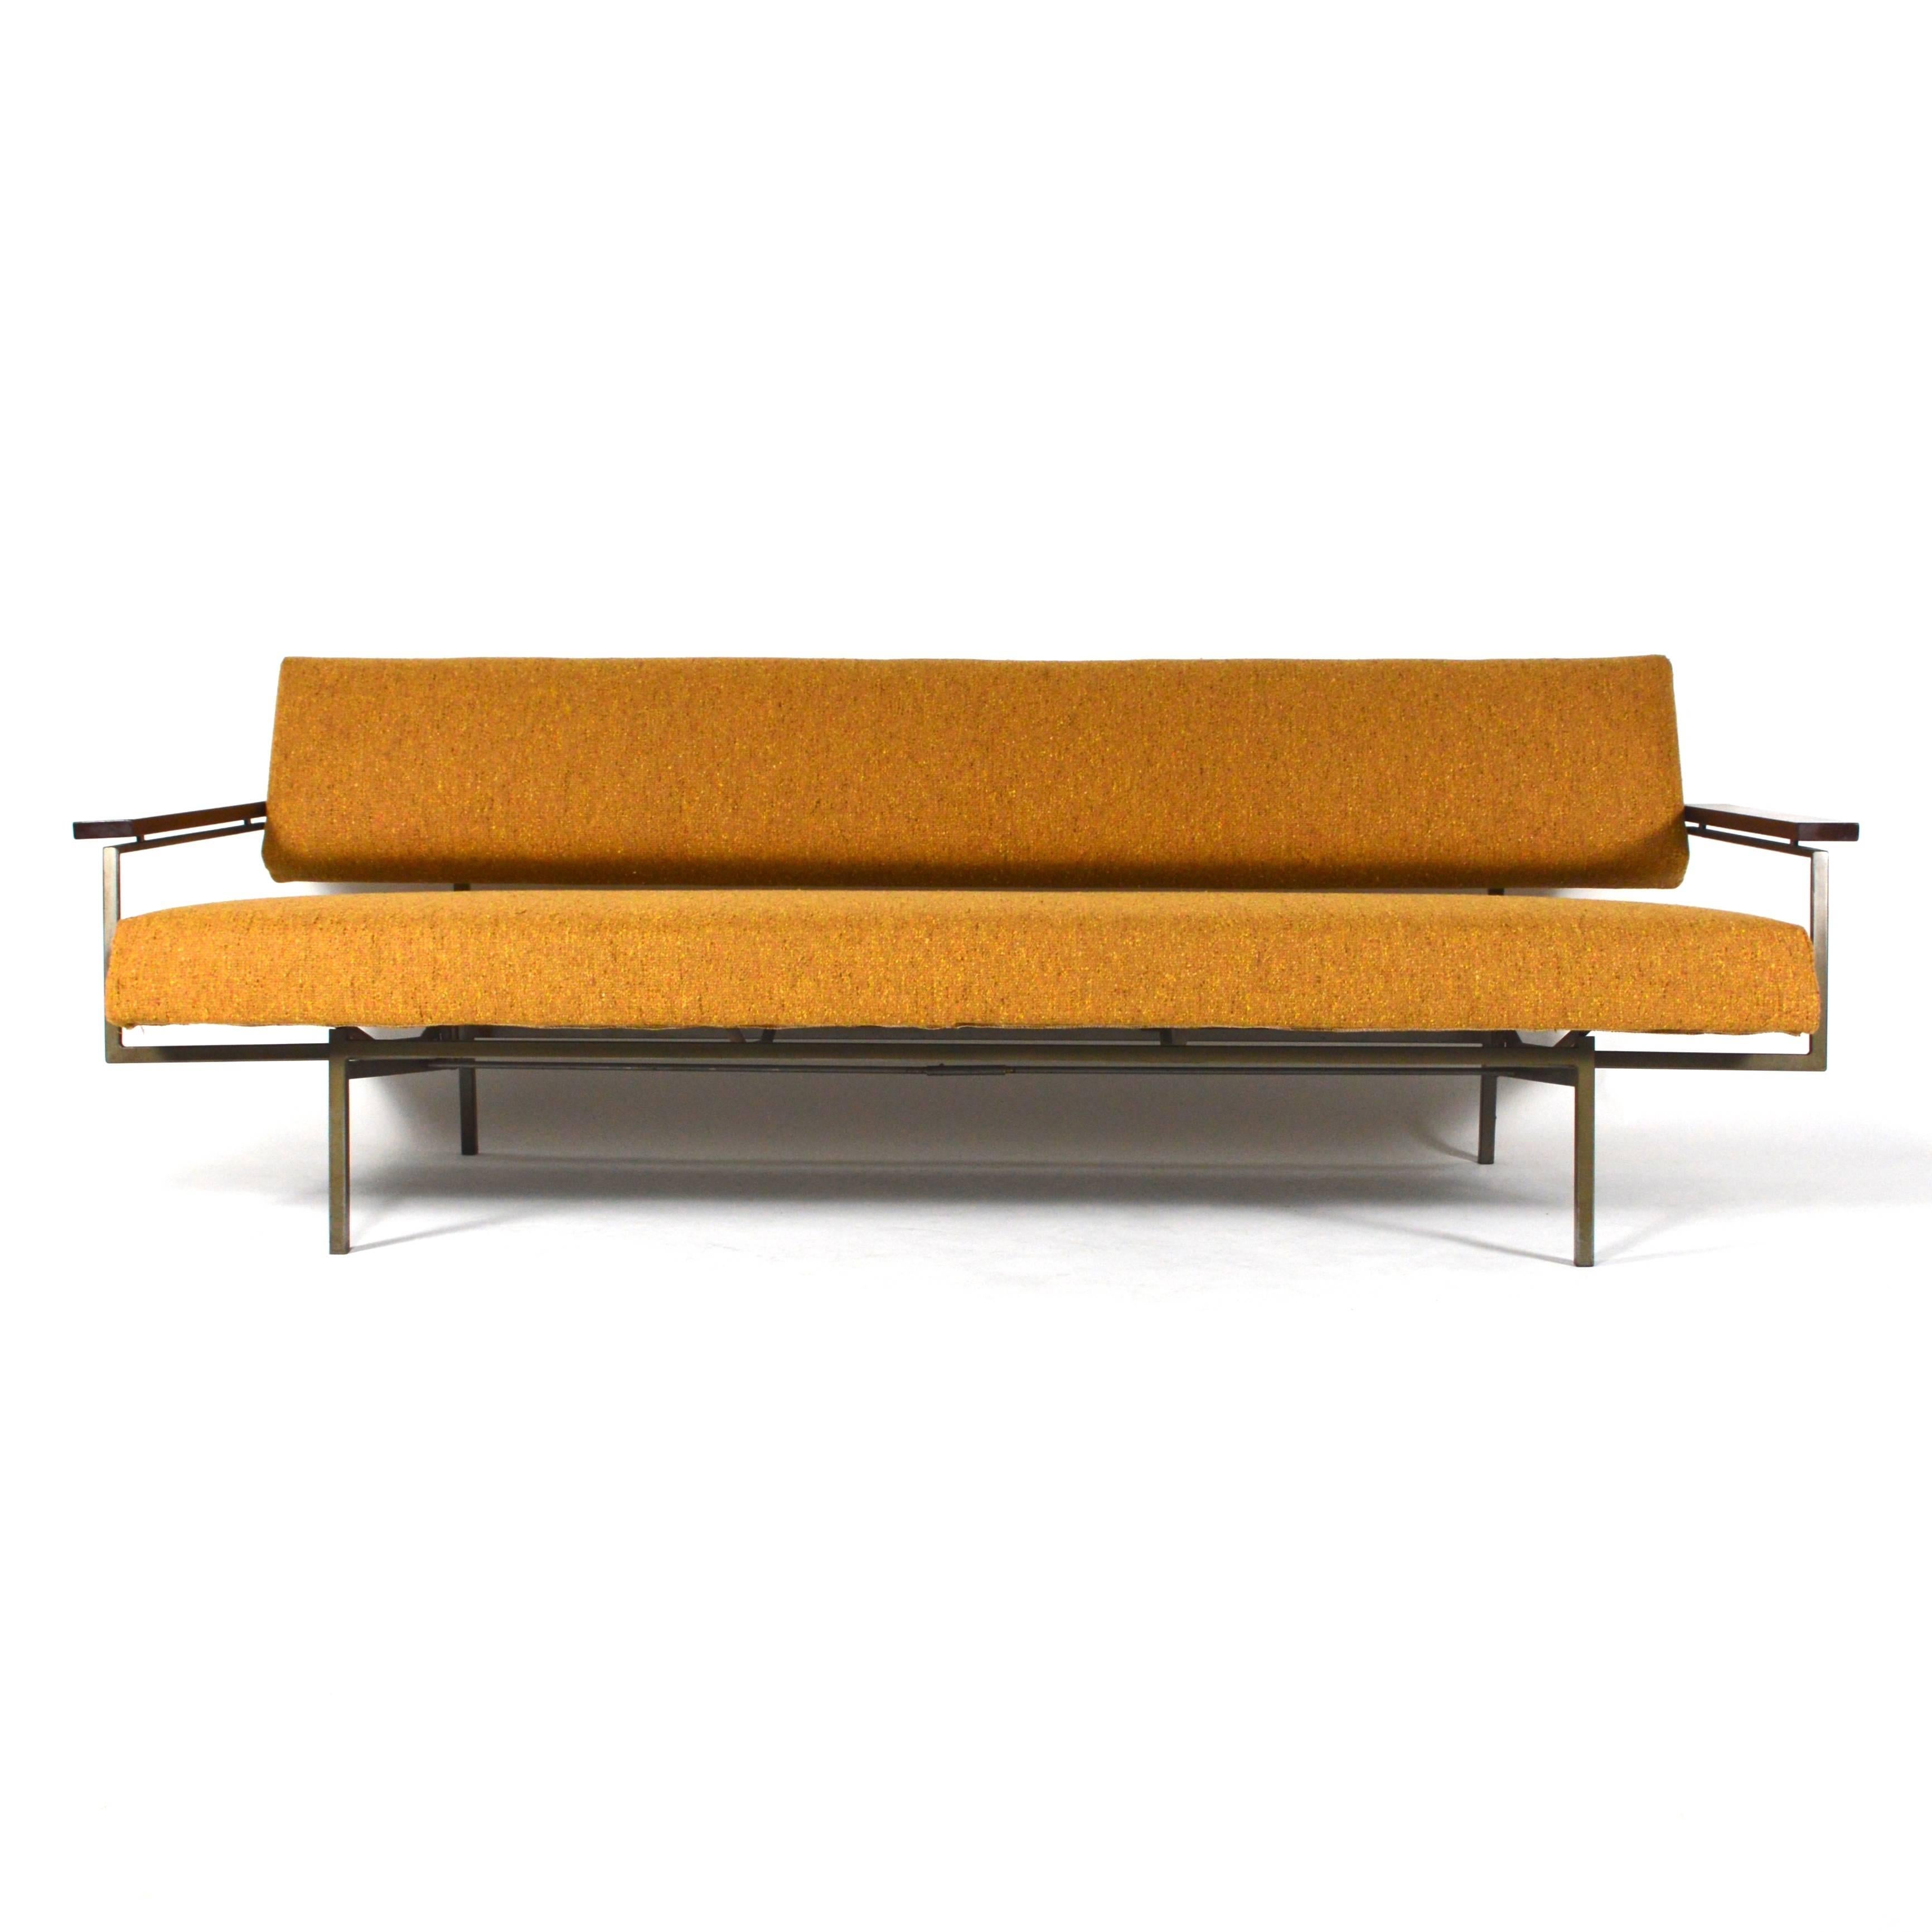 Stunning bed sofa by Rob Parry for Gelderland.
Rare model!
Completely reupholstered with new filling and fabric.
Solid rosewood armrests.
Rob Parry was a protégé of the famous Gerrit Rietveld which shows in his minimalistic and timeless